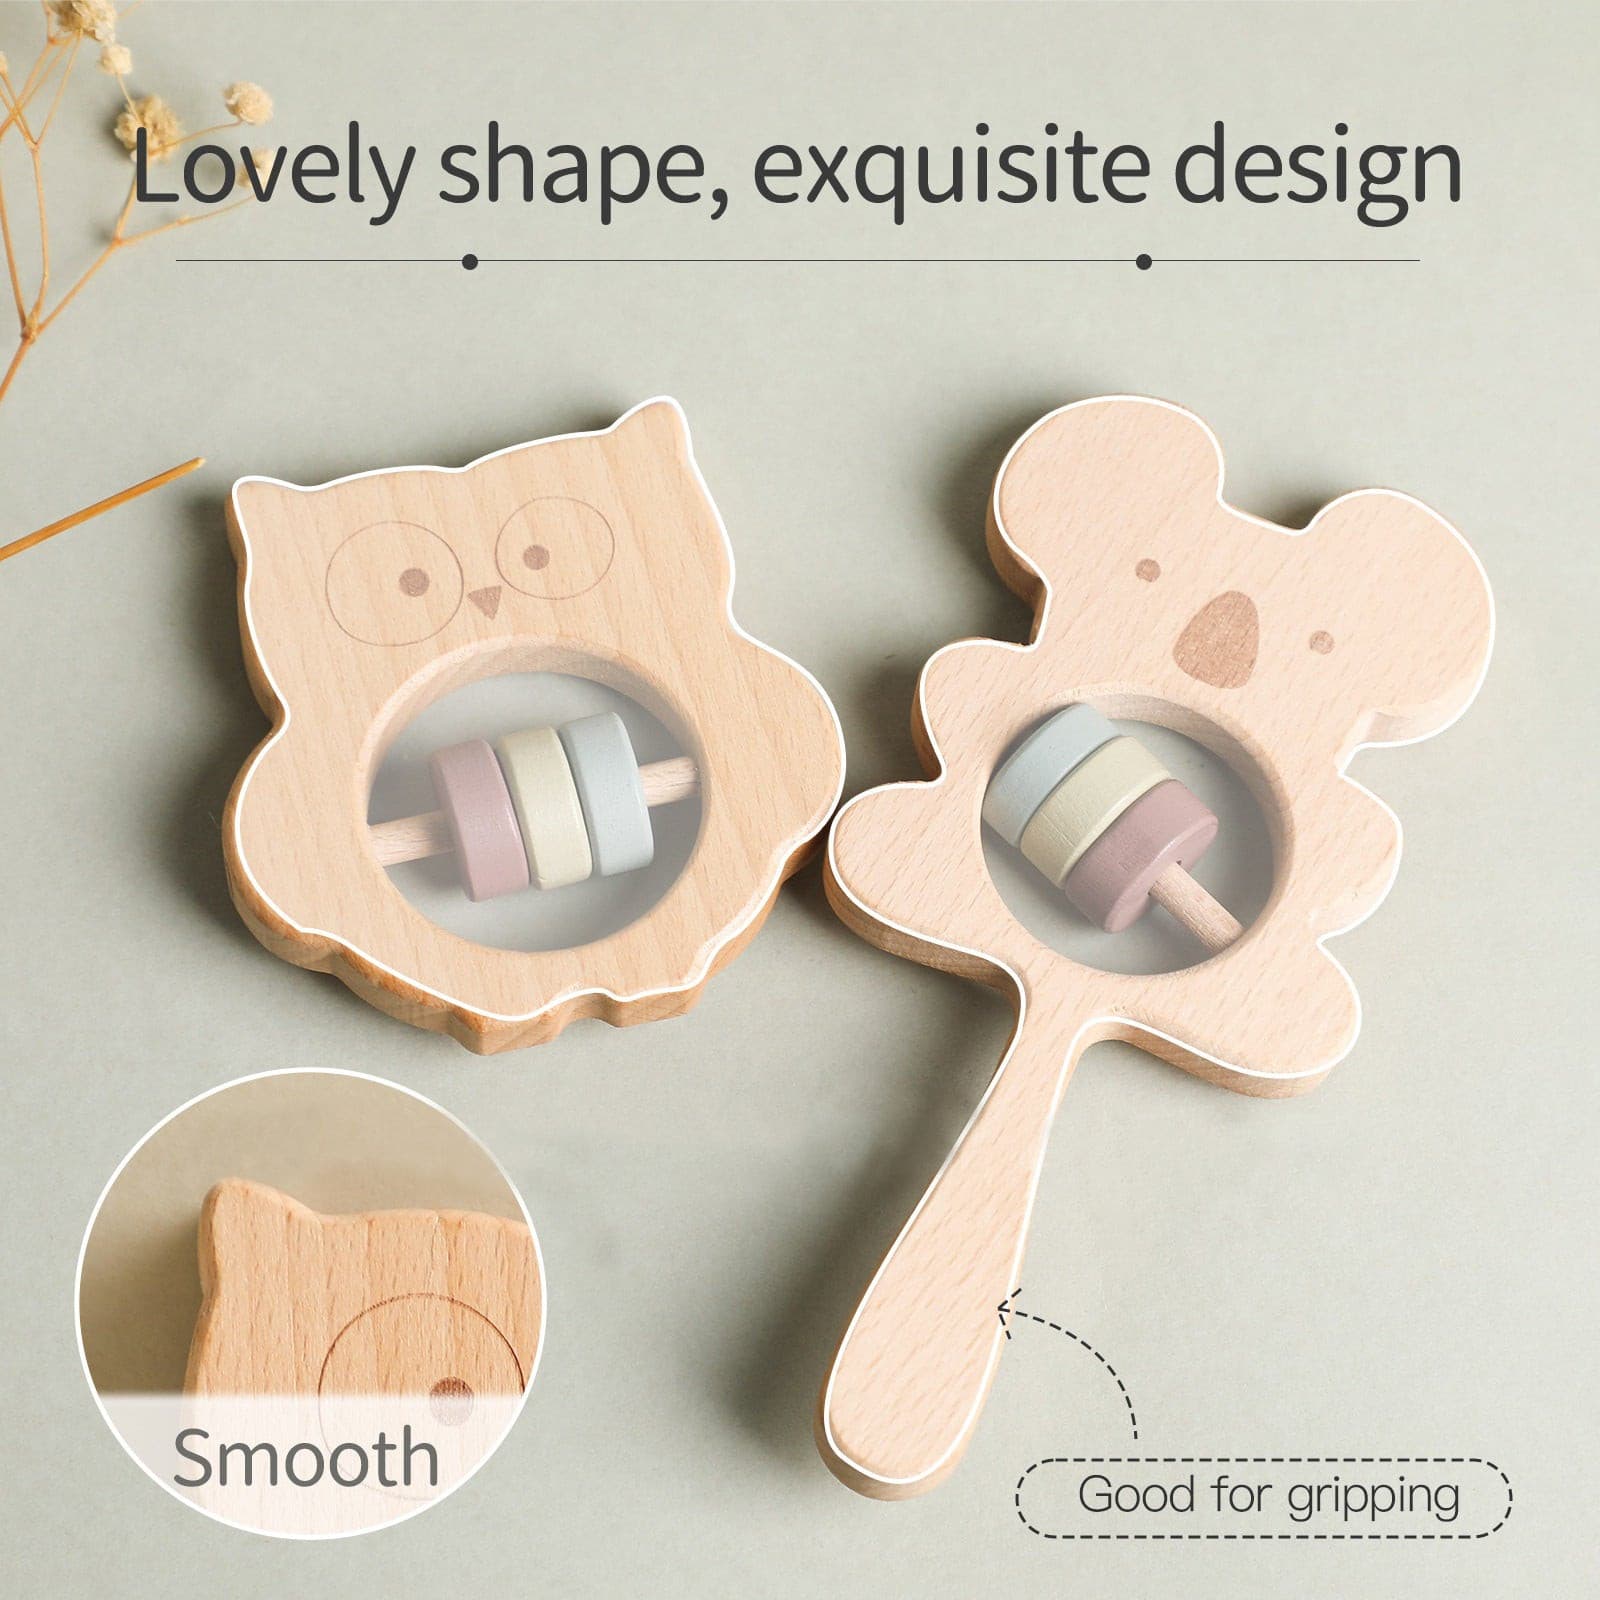 Wooden Animal Rattle. Baby Toy.